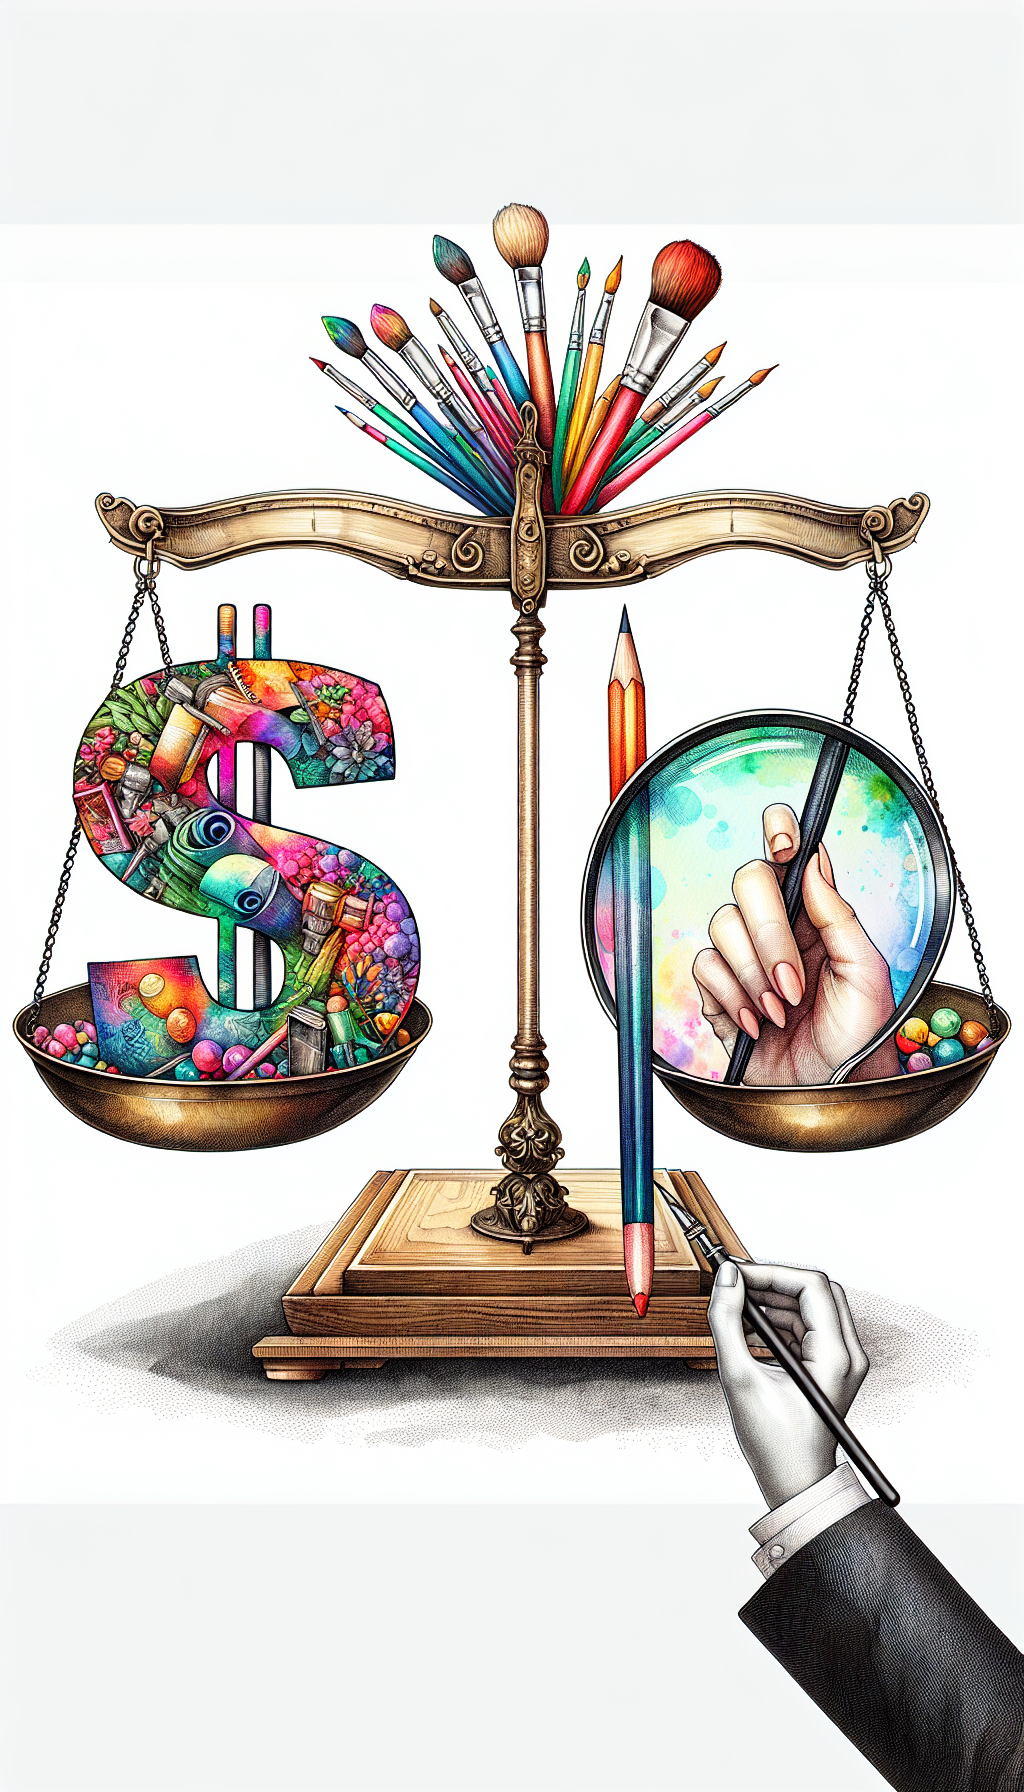 An illustration of a classic balance scale, where on one side there's a canvas displaying a dollar sign composed of assorted colorful art tools, and on the other side, a magnifying glass held by an elegant hand, symbolizing the scrutiny of appraisal. This image is rendered in a mix of watercolor washes for the tools and sharp, ink-like lines for the scale and magnifying glass.